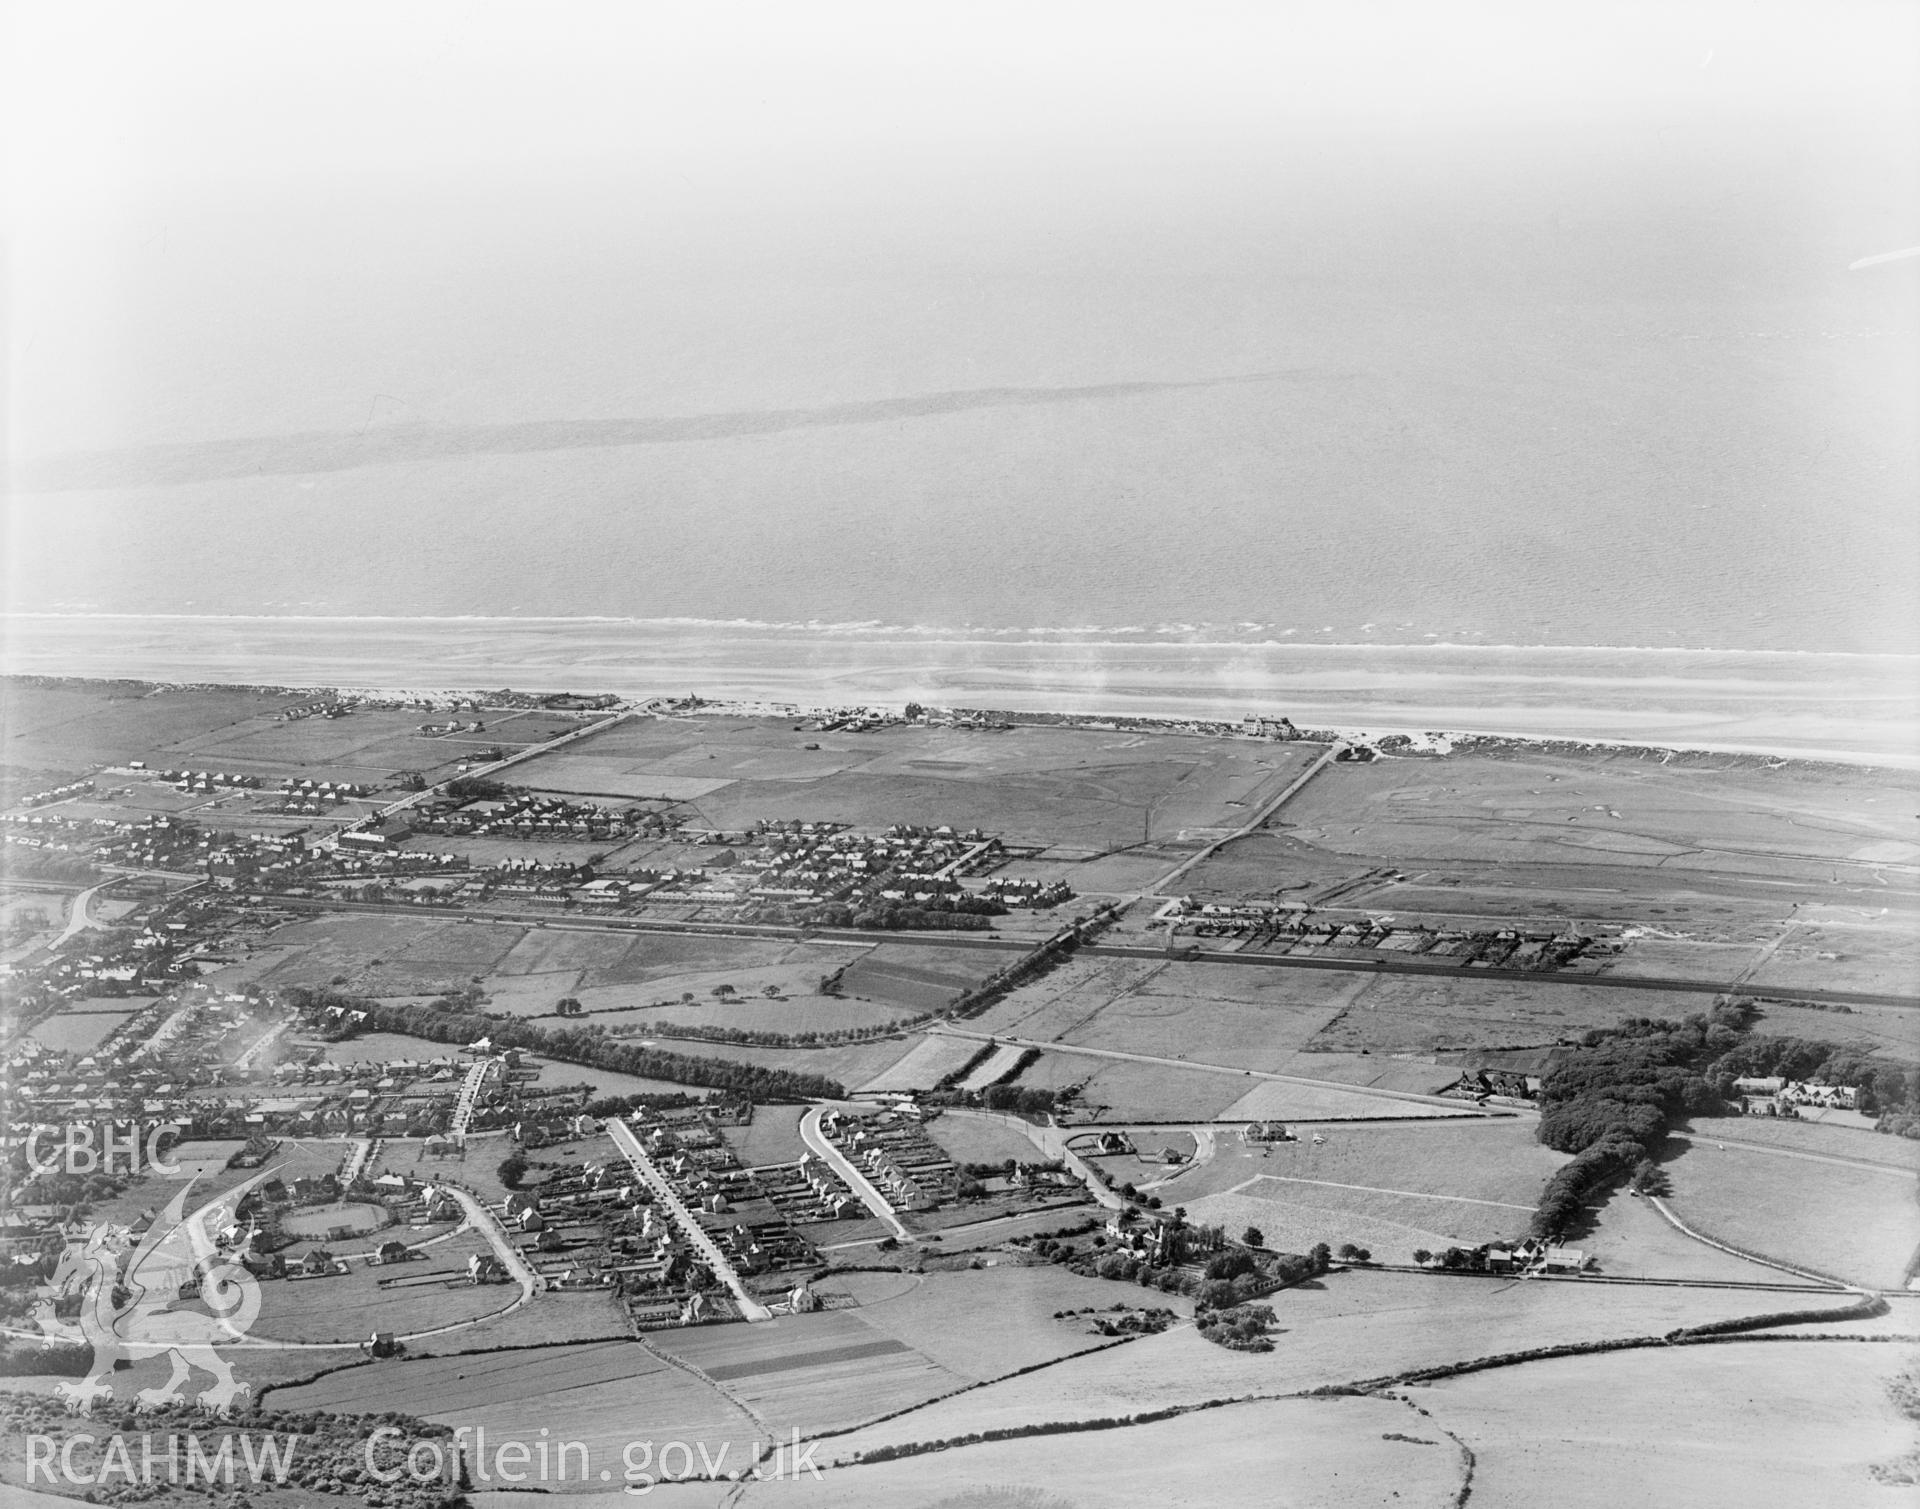 View of Prestatyn showing interwar housing, oblique aerial view. 5?x4? black and white glass plate negative.